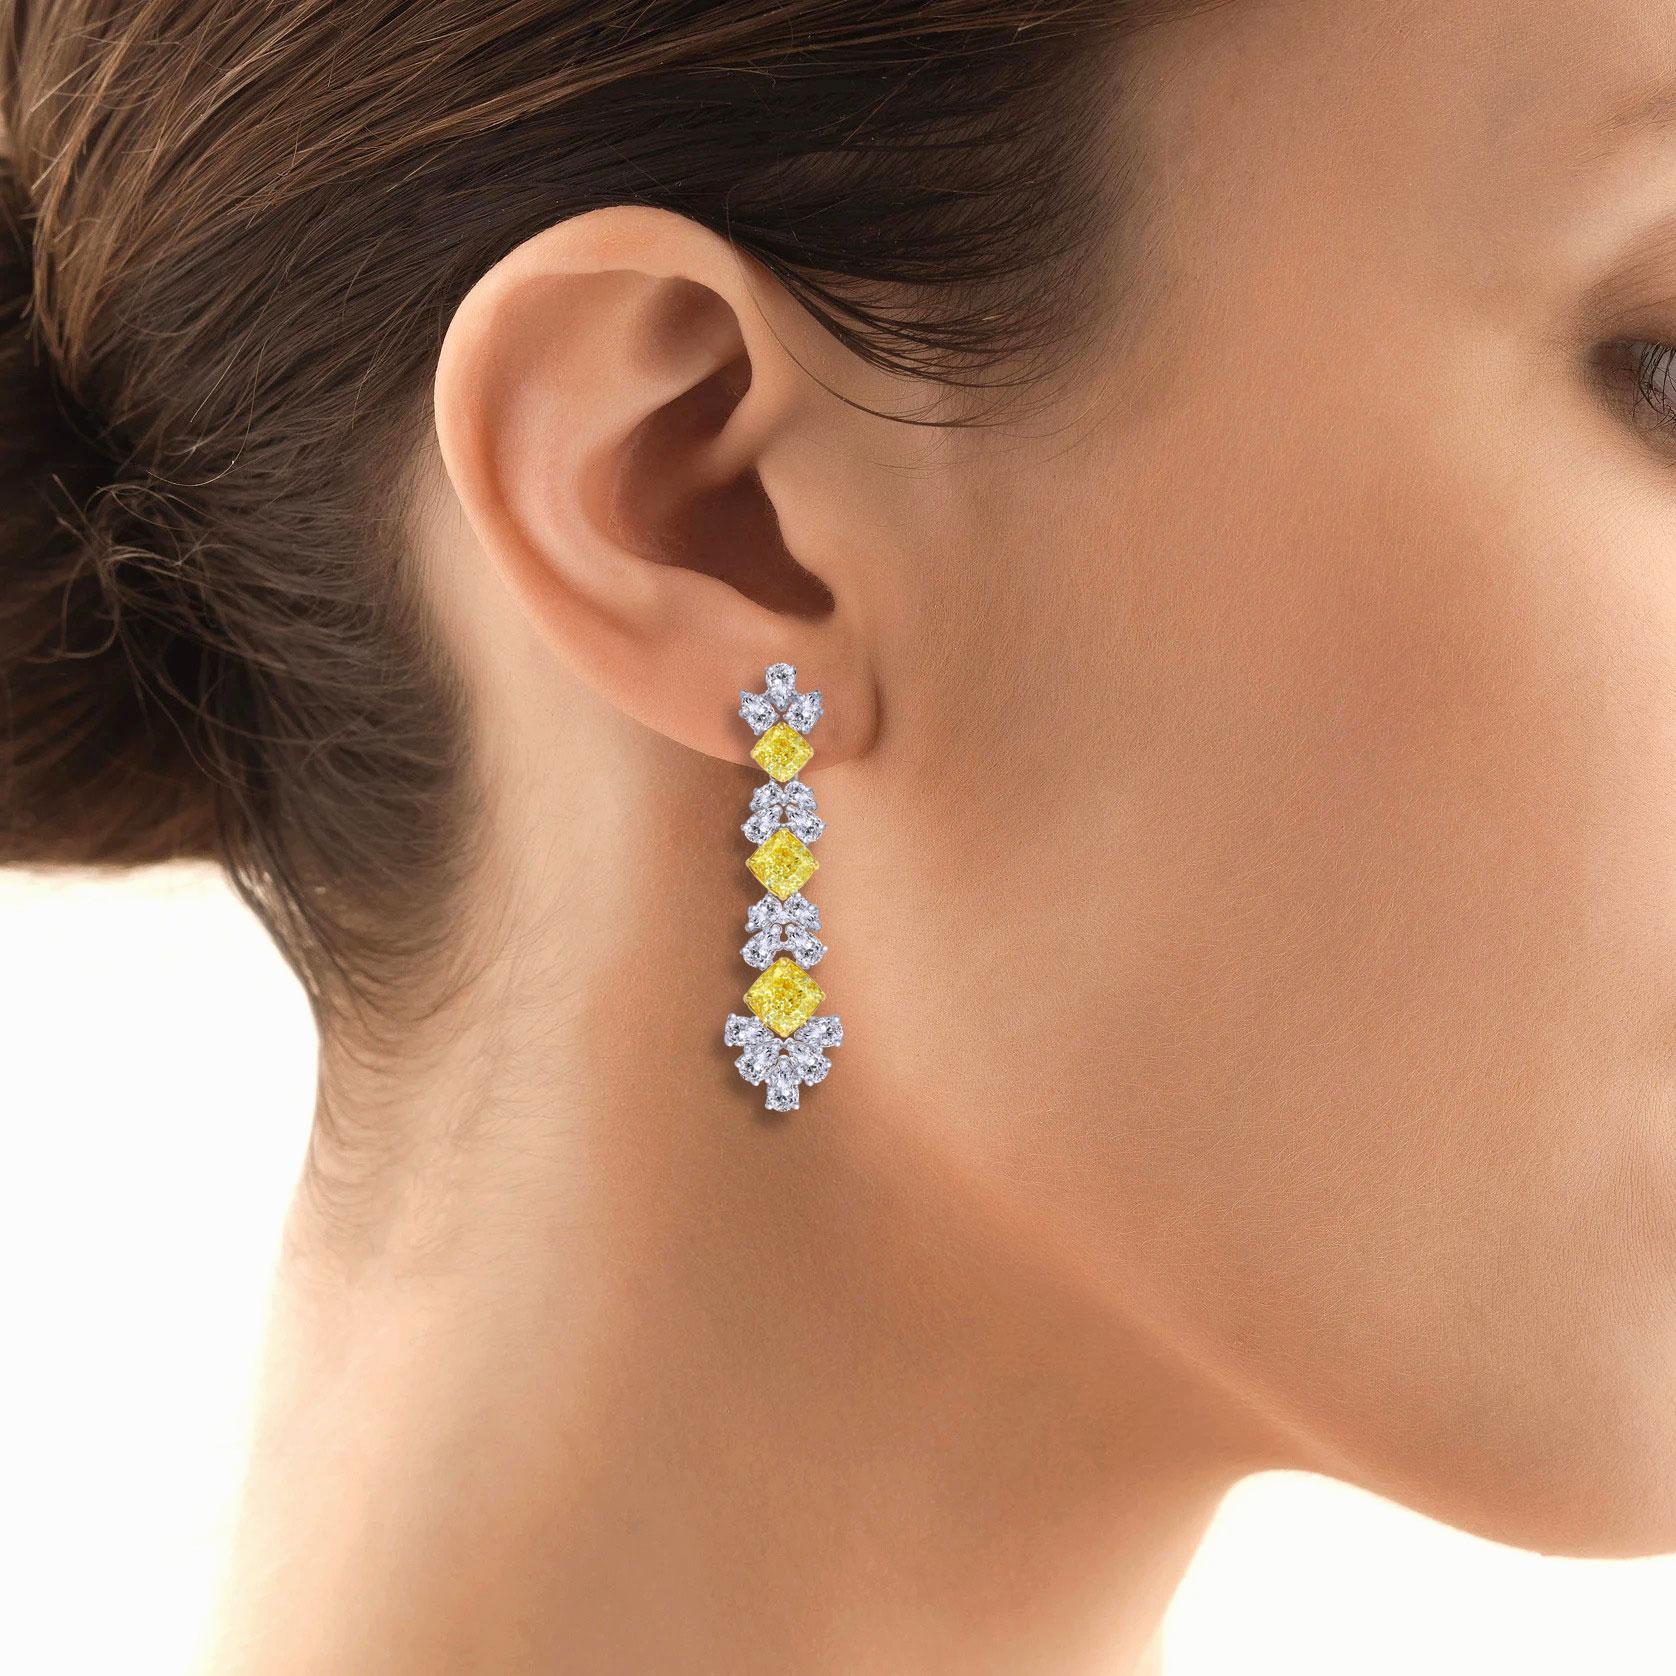 A timeless piece of jewelry like these earrings is for your special occasions. Earring has matching 1ct, 1.5ct and 2ct each yellow cushion diamonds perfectly paired with white pear shape diamonds interspersed to create a mesmerising piece of